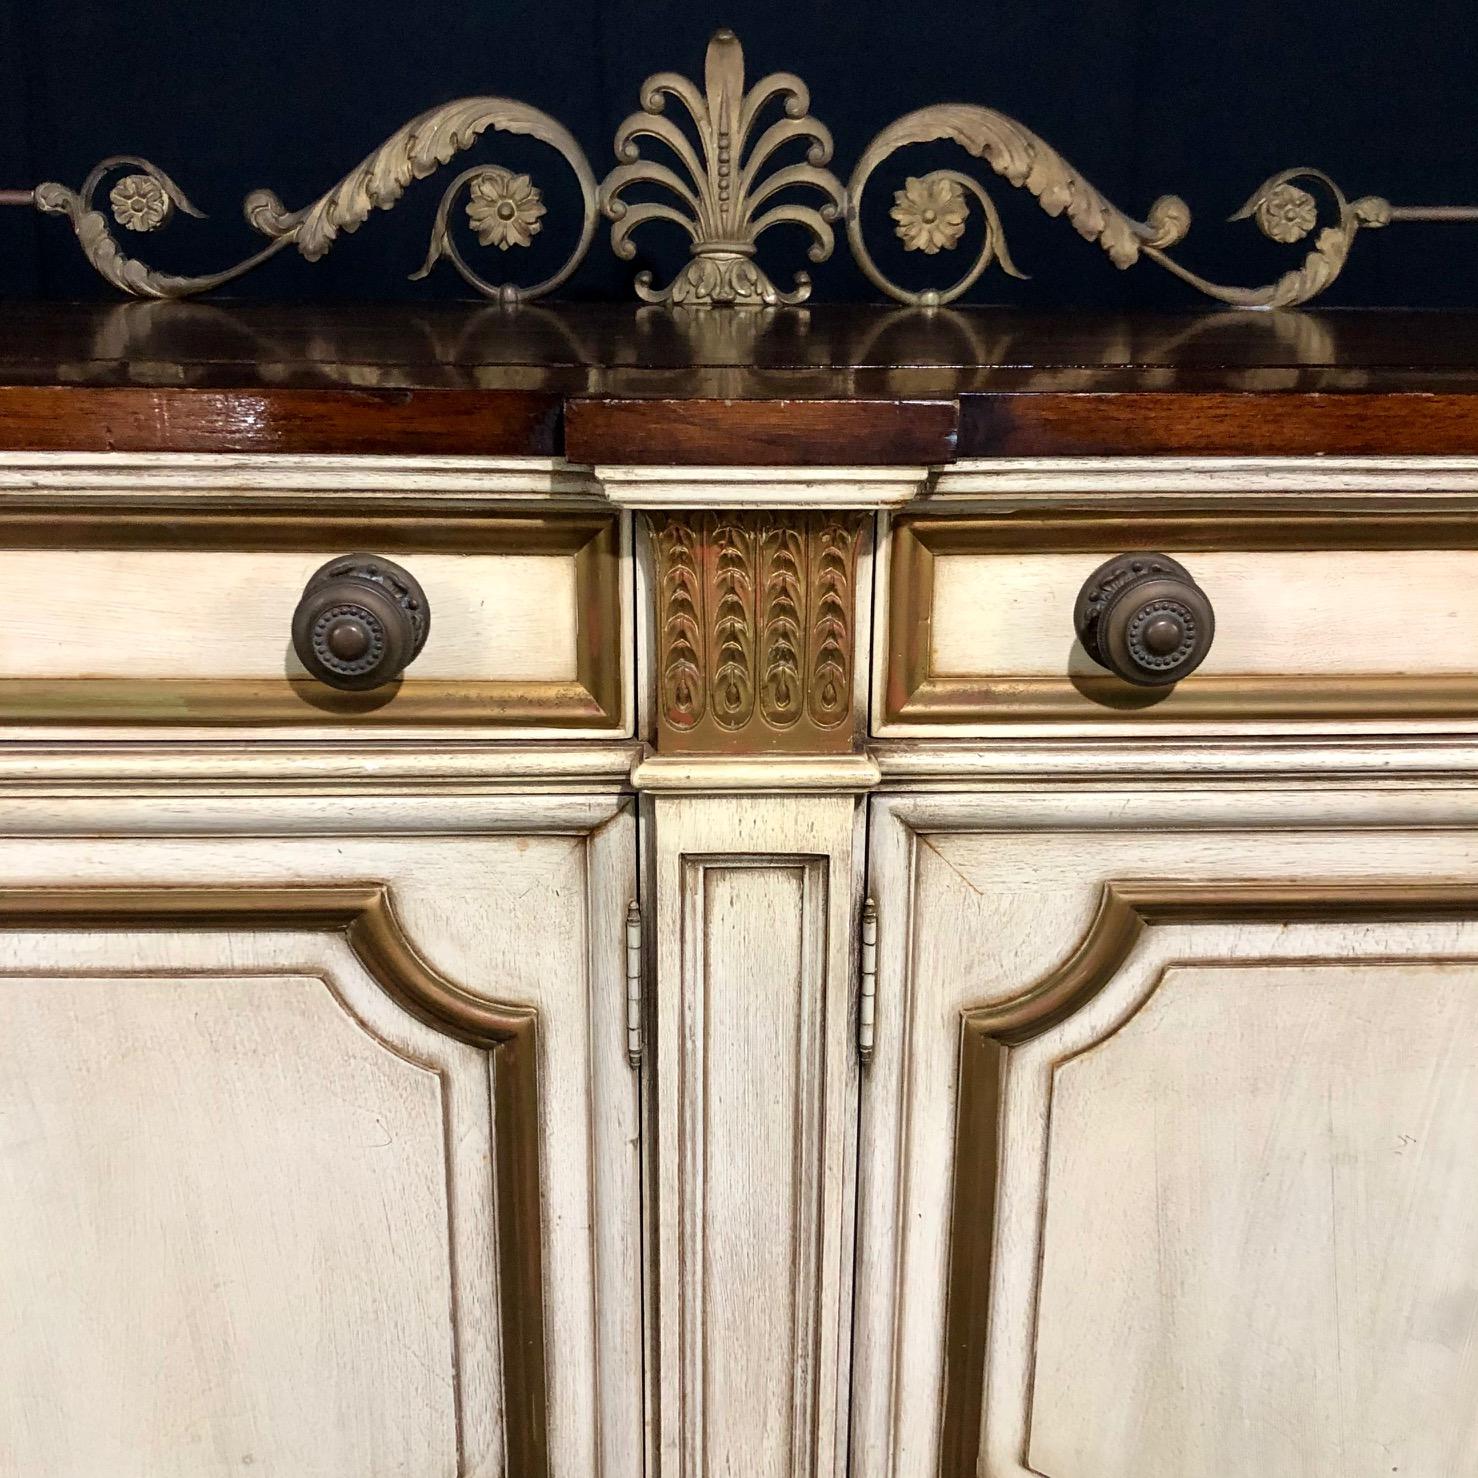 Classic Louis XVI 18th century style sideboard buffet having four drawers - two long and two short, with raised banded edges. The entire case sits on four splayed legs. Simple stepped cornice at the top. The finish is semi-glossy, and there is no